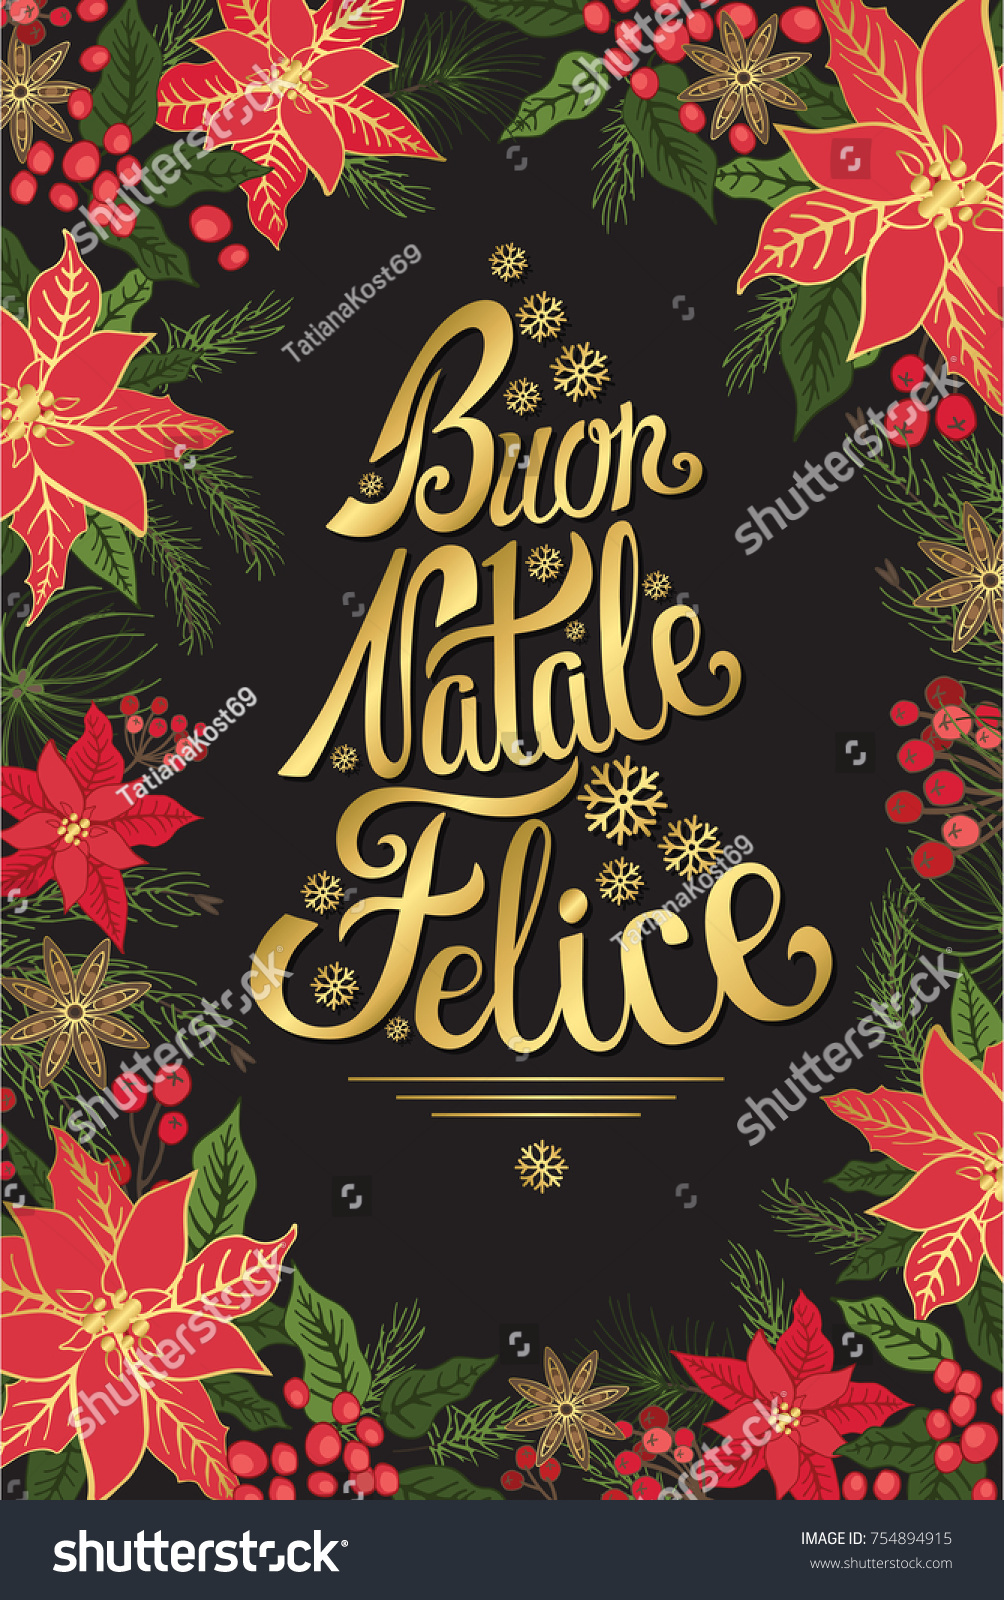 Buon Natale Vintage.Christmas Party Buon Natale Invitationdesign Templateflyerticket Stock Vector Royalty Free 754894915